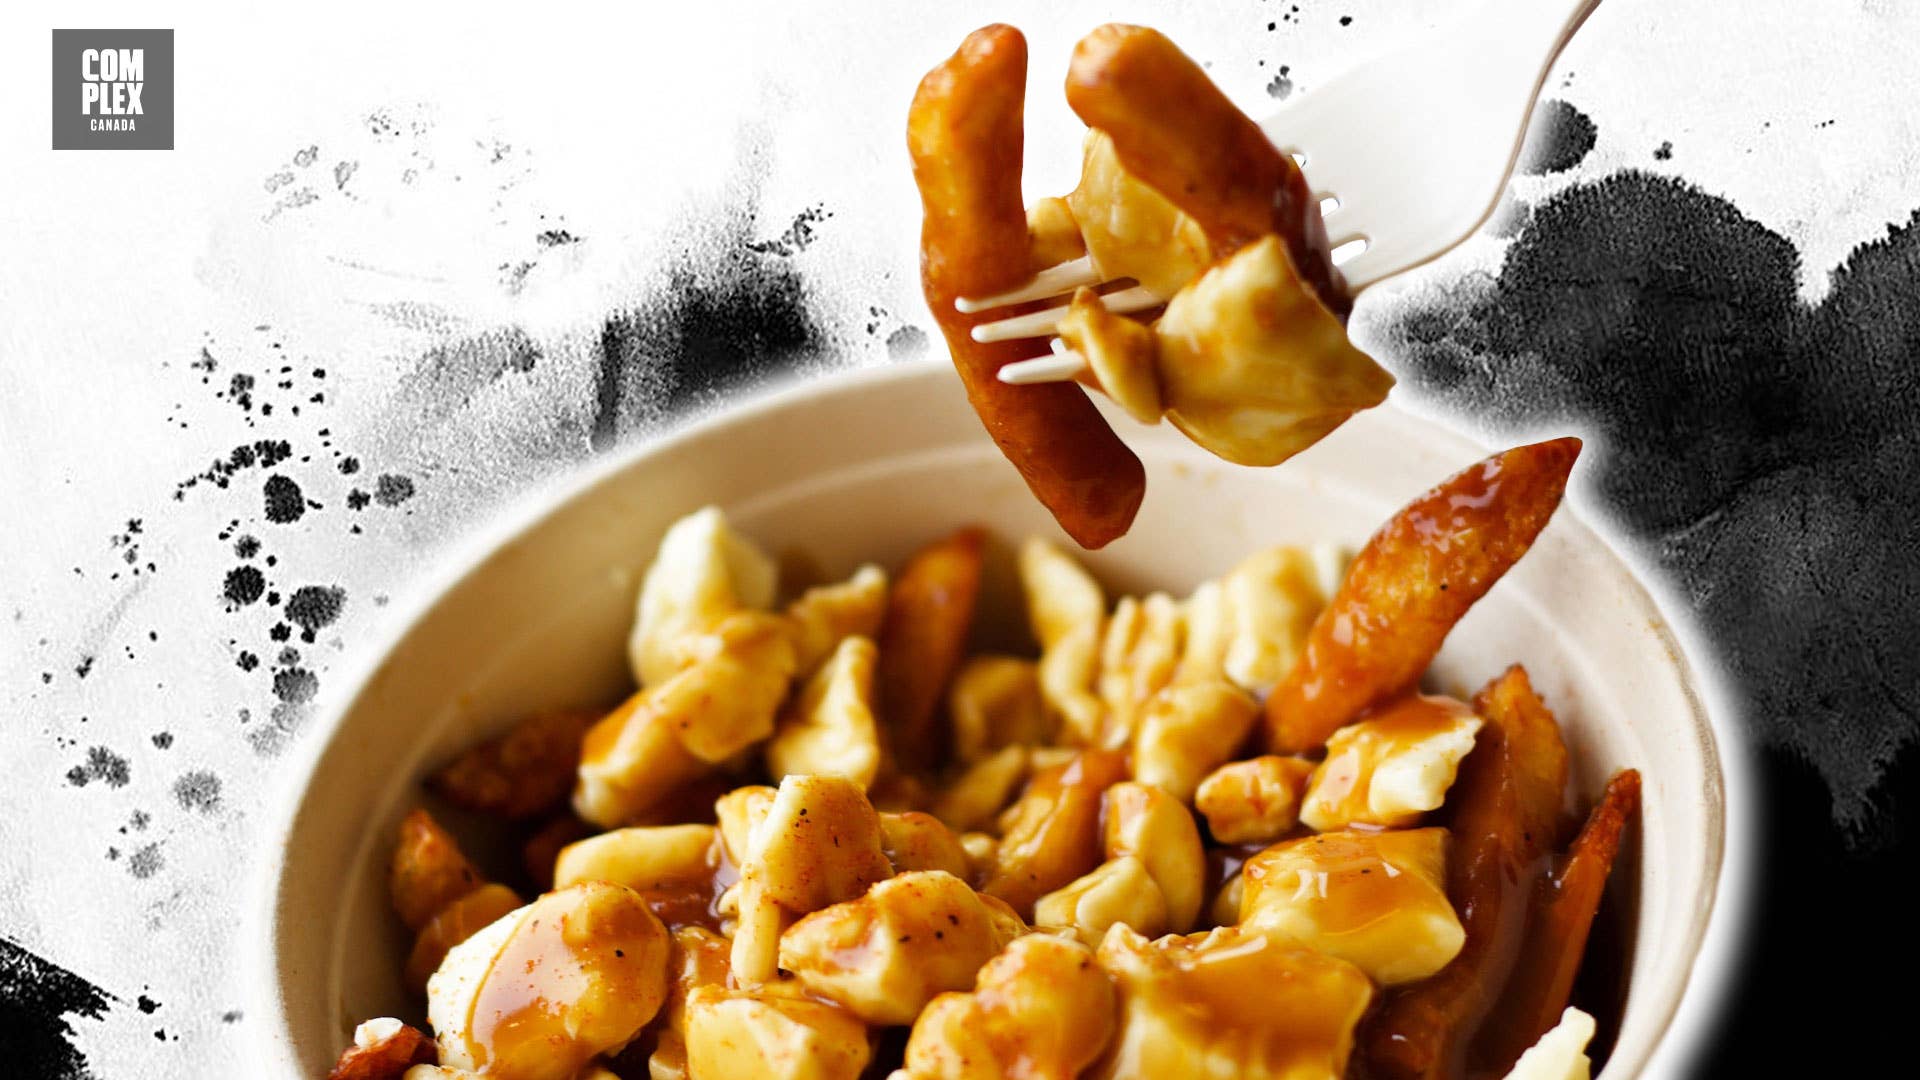 The 10 Best Poutine Restaurants in Montreal